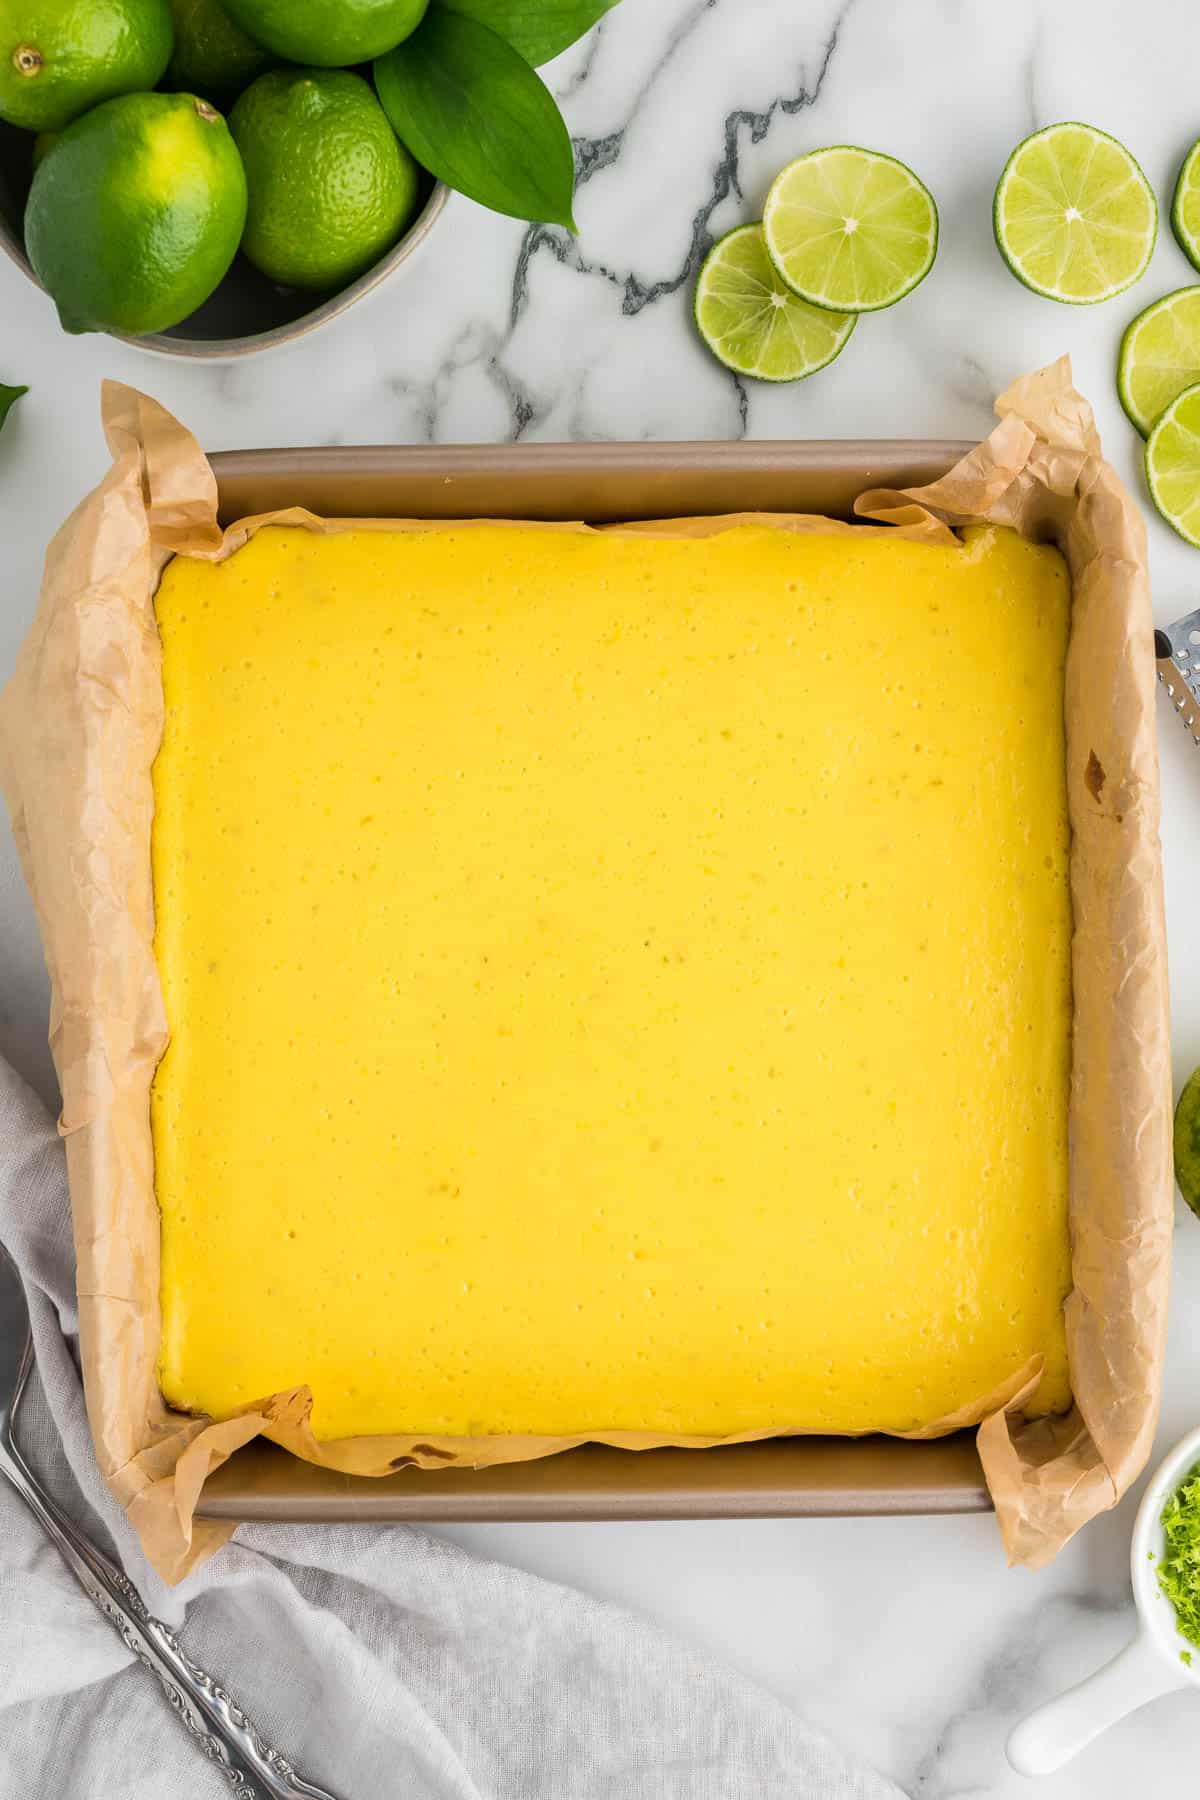 key lime bars in a square baking pan lined with parchment paper surrounded by a bowl of whole limes and fresh lime slices on the counter beside the pan